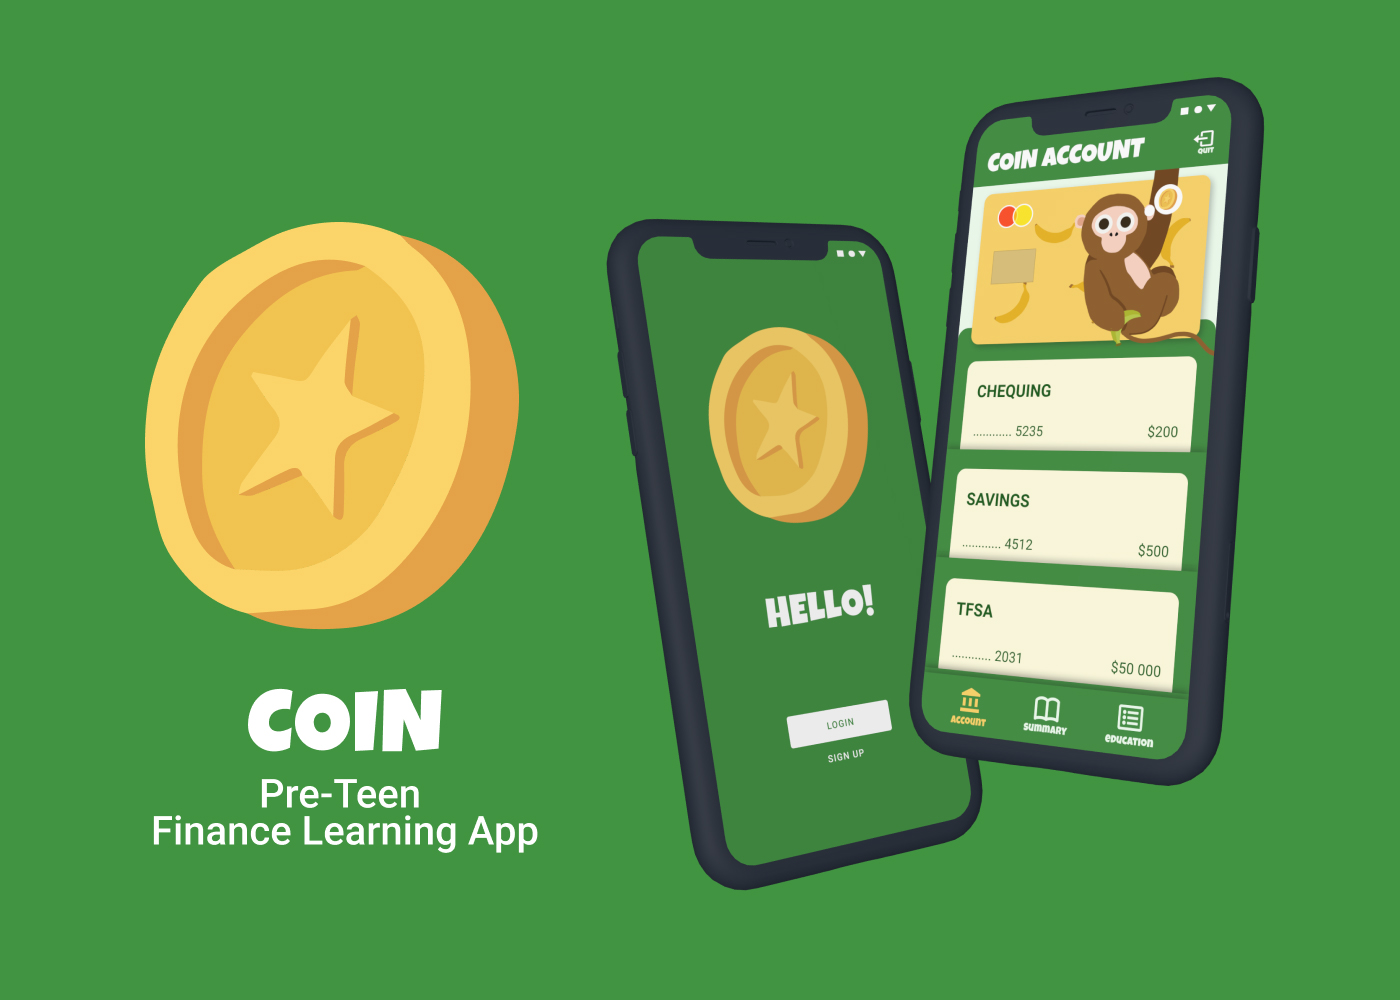 The coin is a easy-to-understand banking app designed for the pre-teen age group. The
                purpose was to develop an interest in Debits and credits. Introduce finance for elementary-aged children. Learn about saving/spending in a fun & positive space.